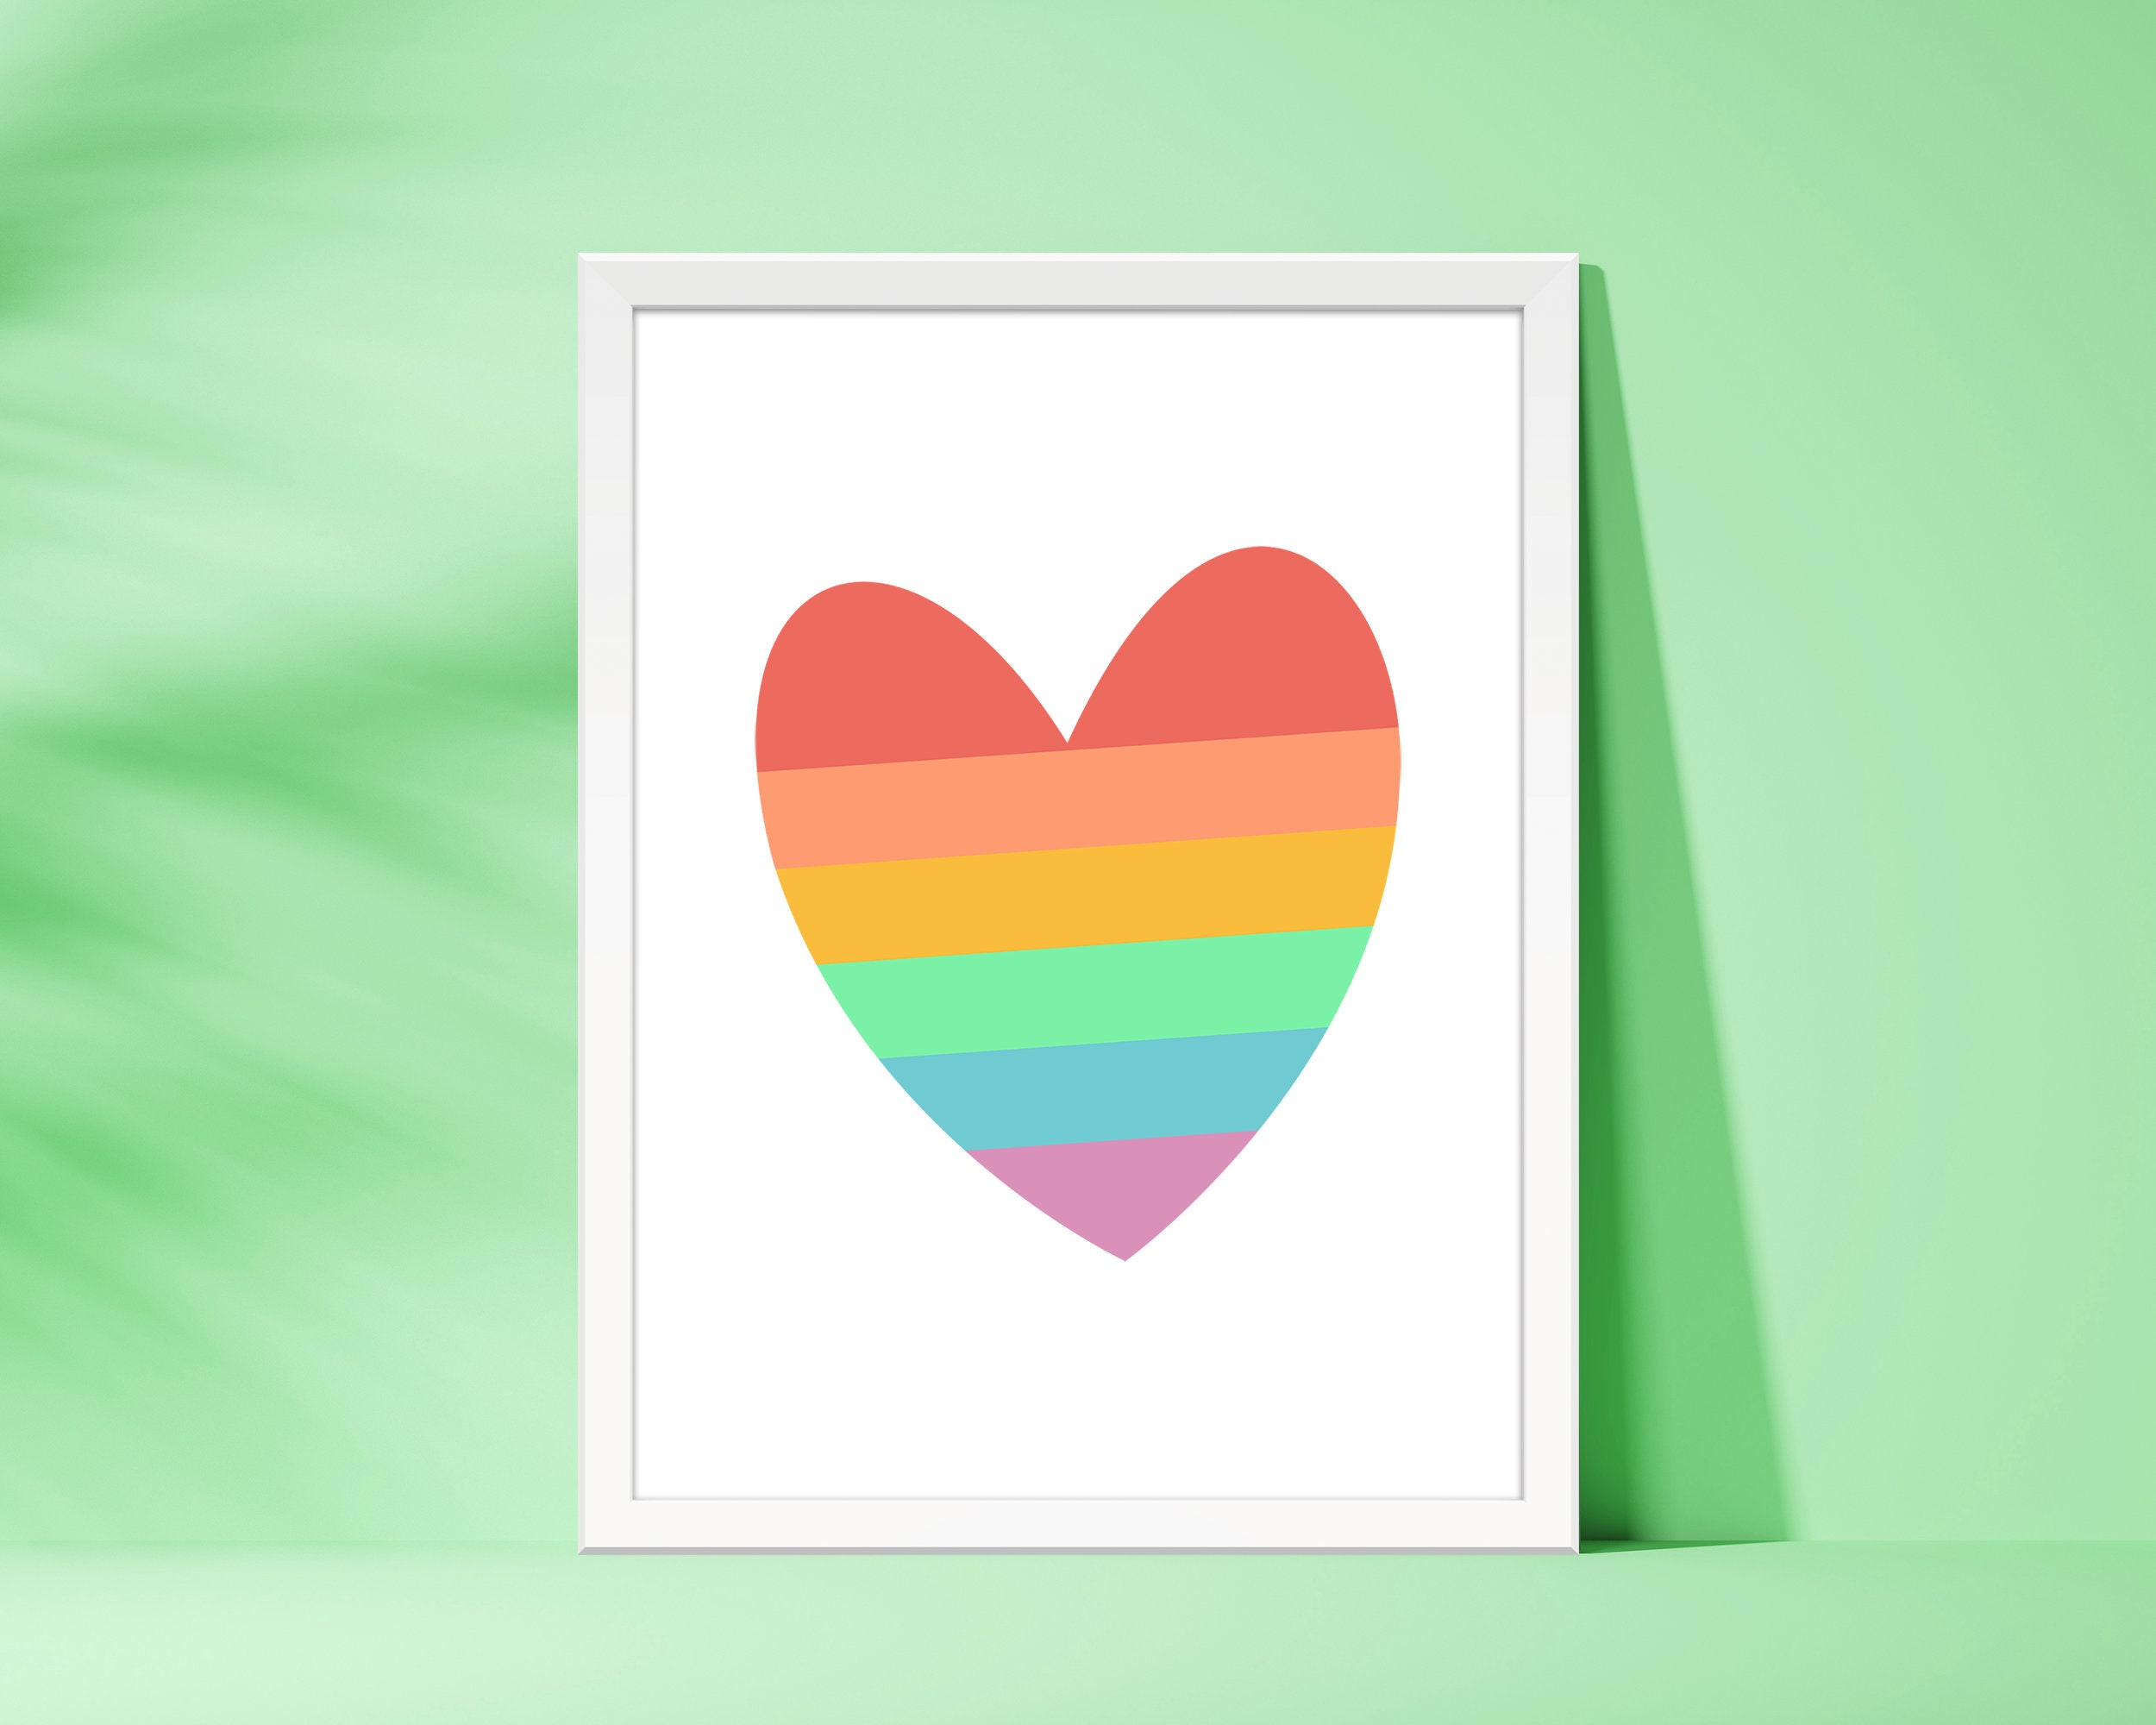 Rainbow Heart Drawn with Oil Pastels on Paper Stock Photo - Image of  lgbtqia, craft: 249910882